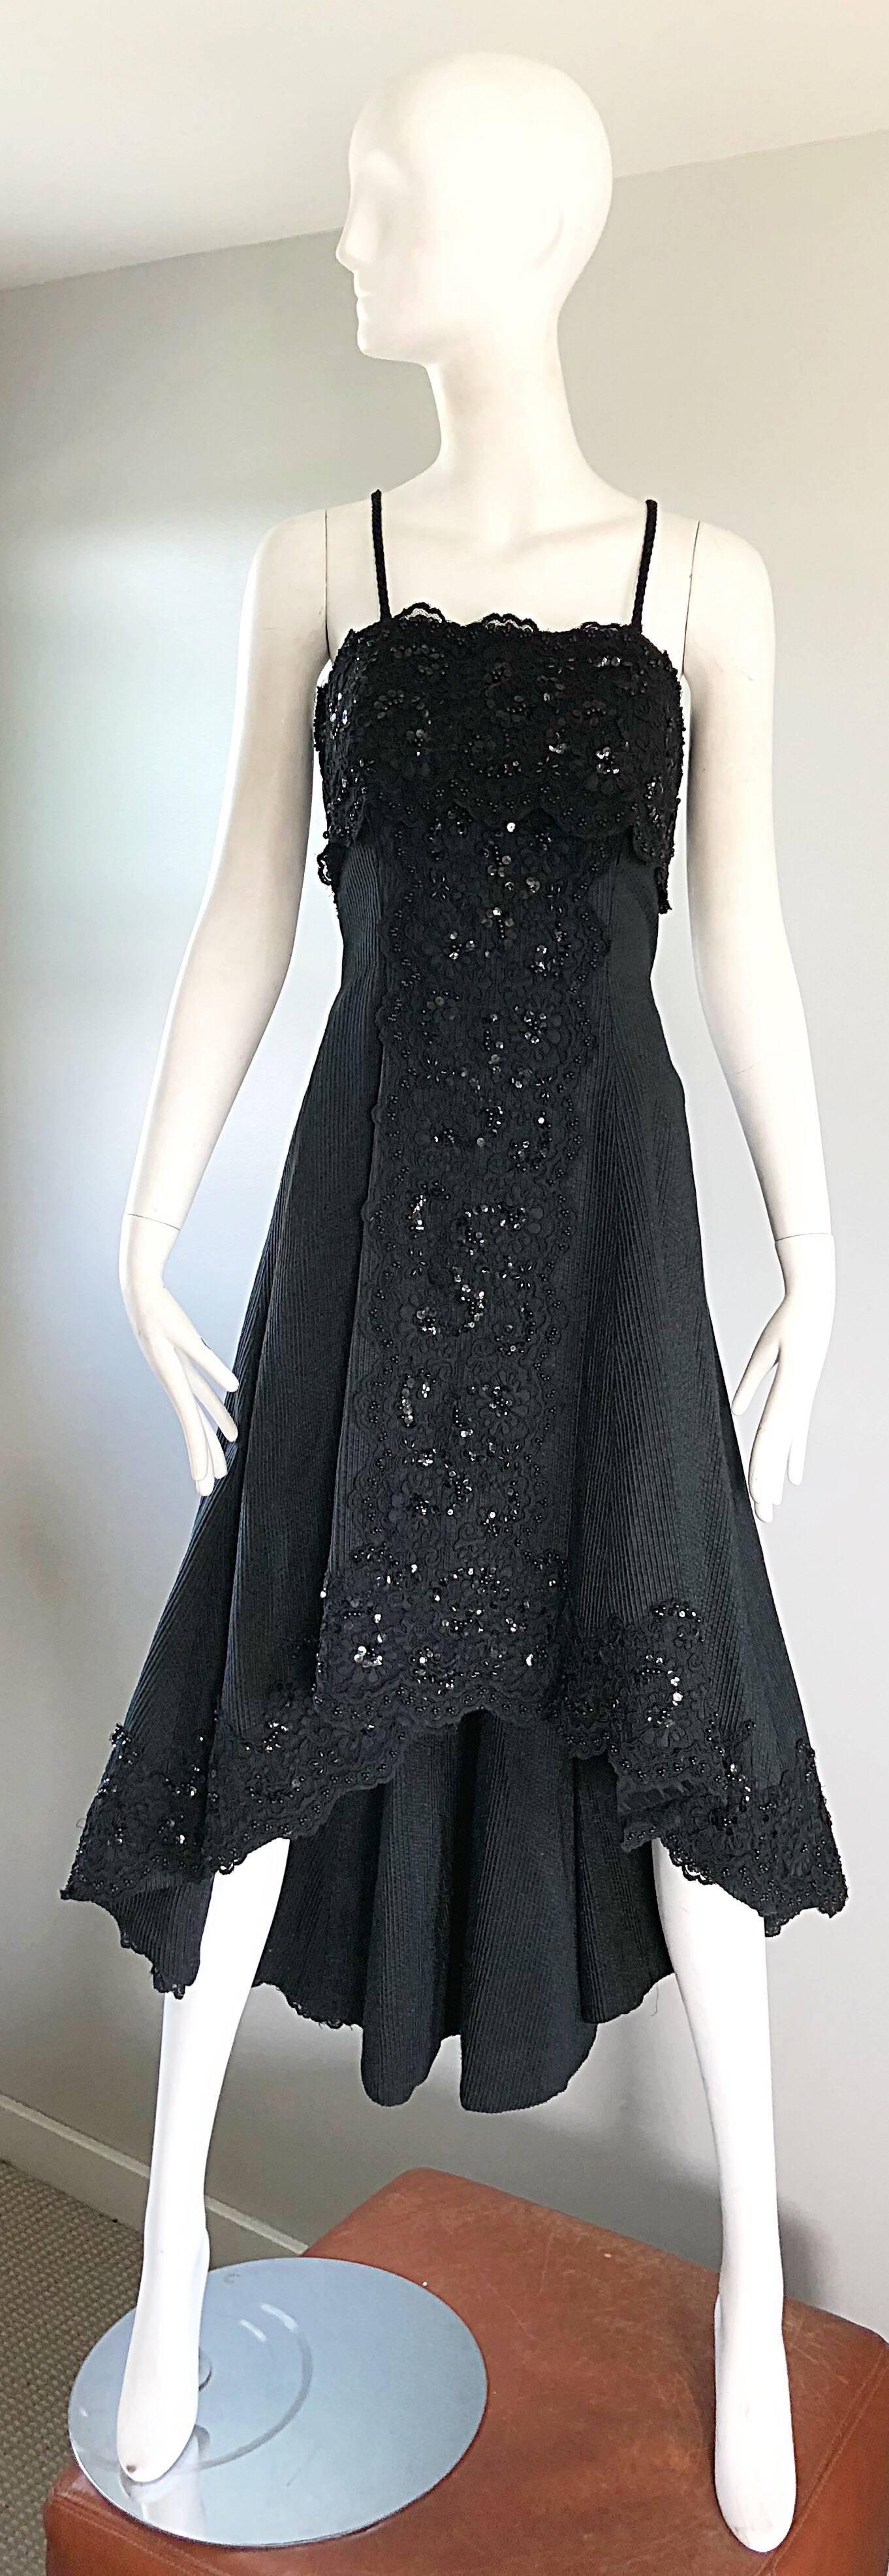 1990s Couture Black Silk Hi - Lo Beaded Sleeveless 50s Style Cocktail Dress For Sale 6